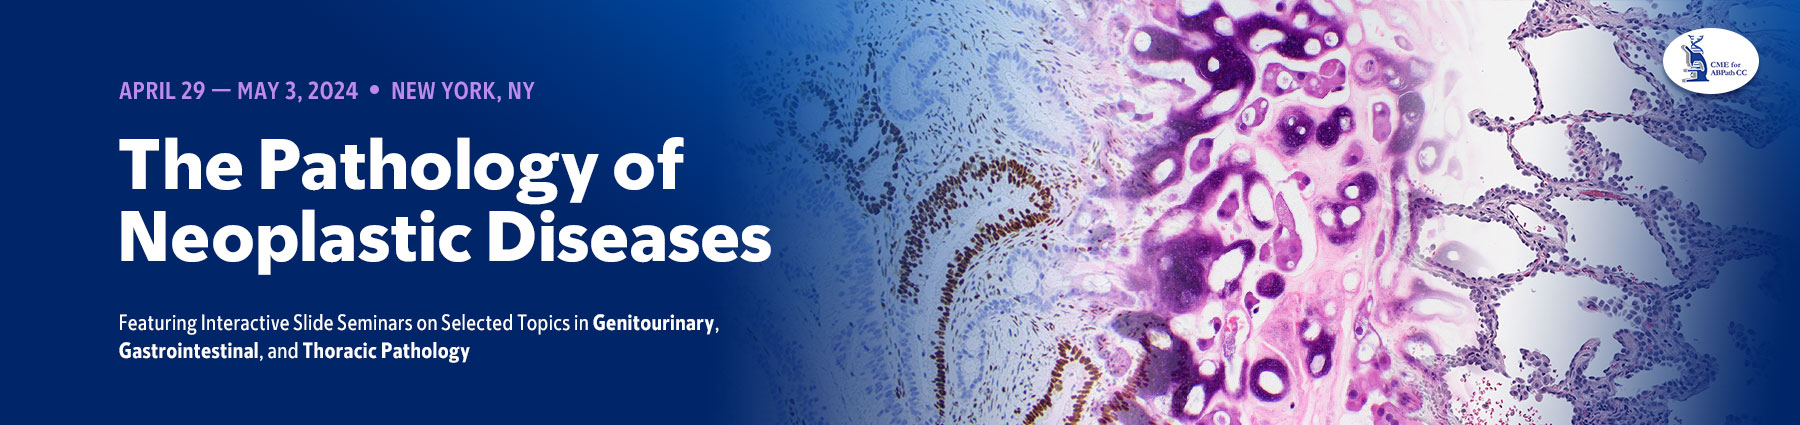 The Pathology of Neoplastic Diseases 2024 Banner